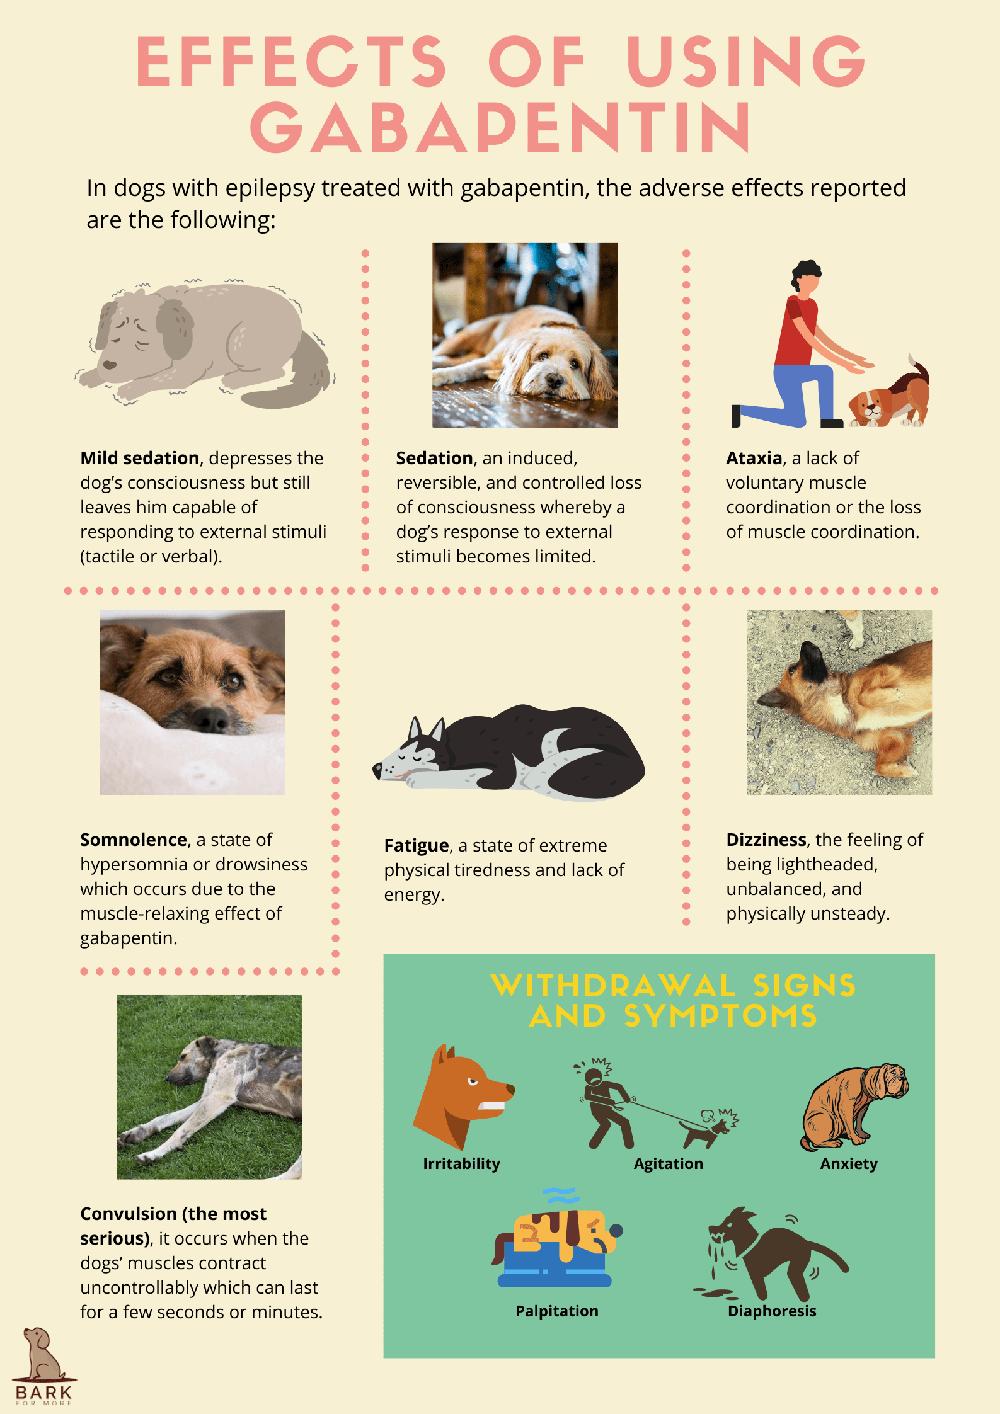 This chart shows the effects of using Gabapentin in dogs, including mild sedation, ataxia, somnolence, fatigue, dizziness, and more serious side effects such as convulsions, irritability, agitation, anxiety, palpitation, and diaphoresis.